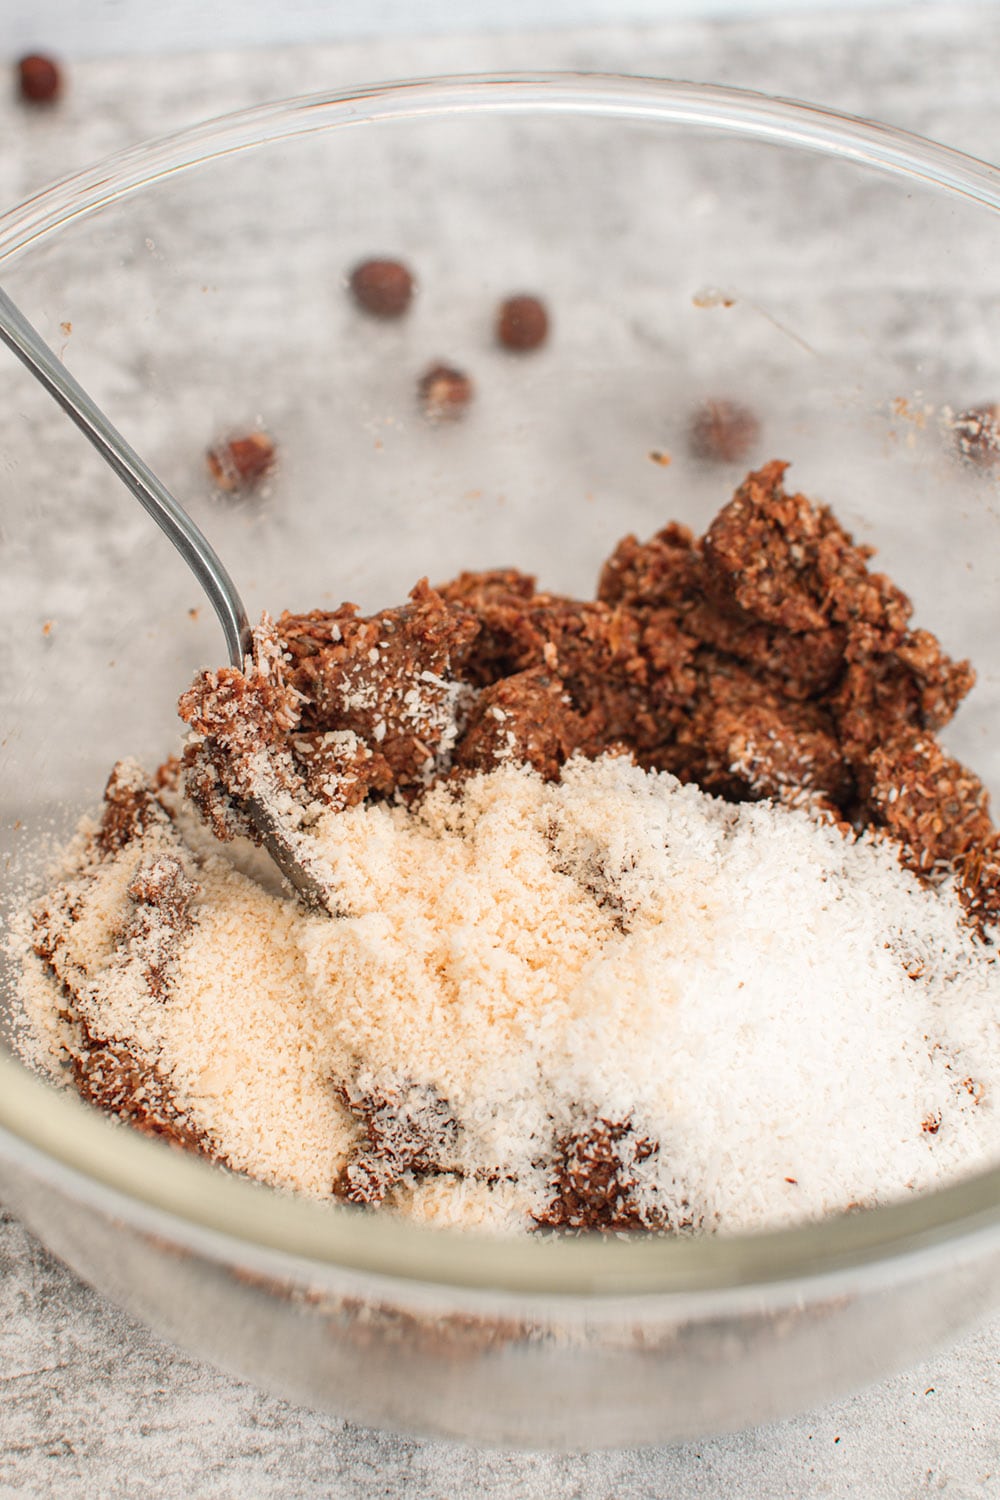 Dry ingredients into wet for energy date bites.